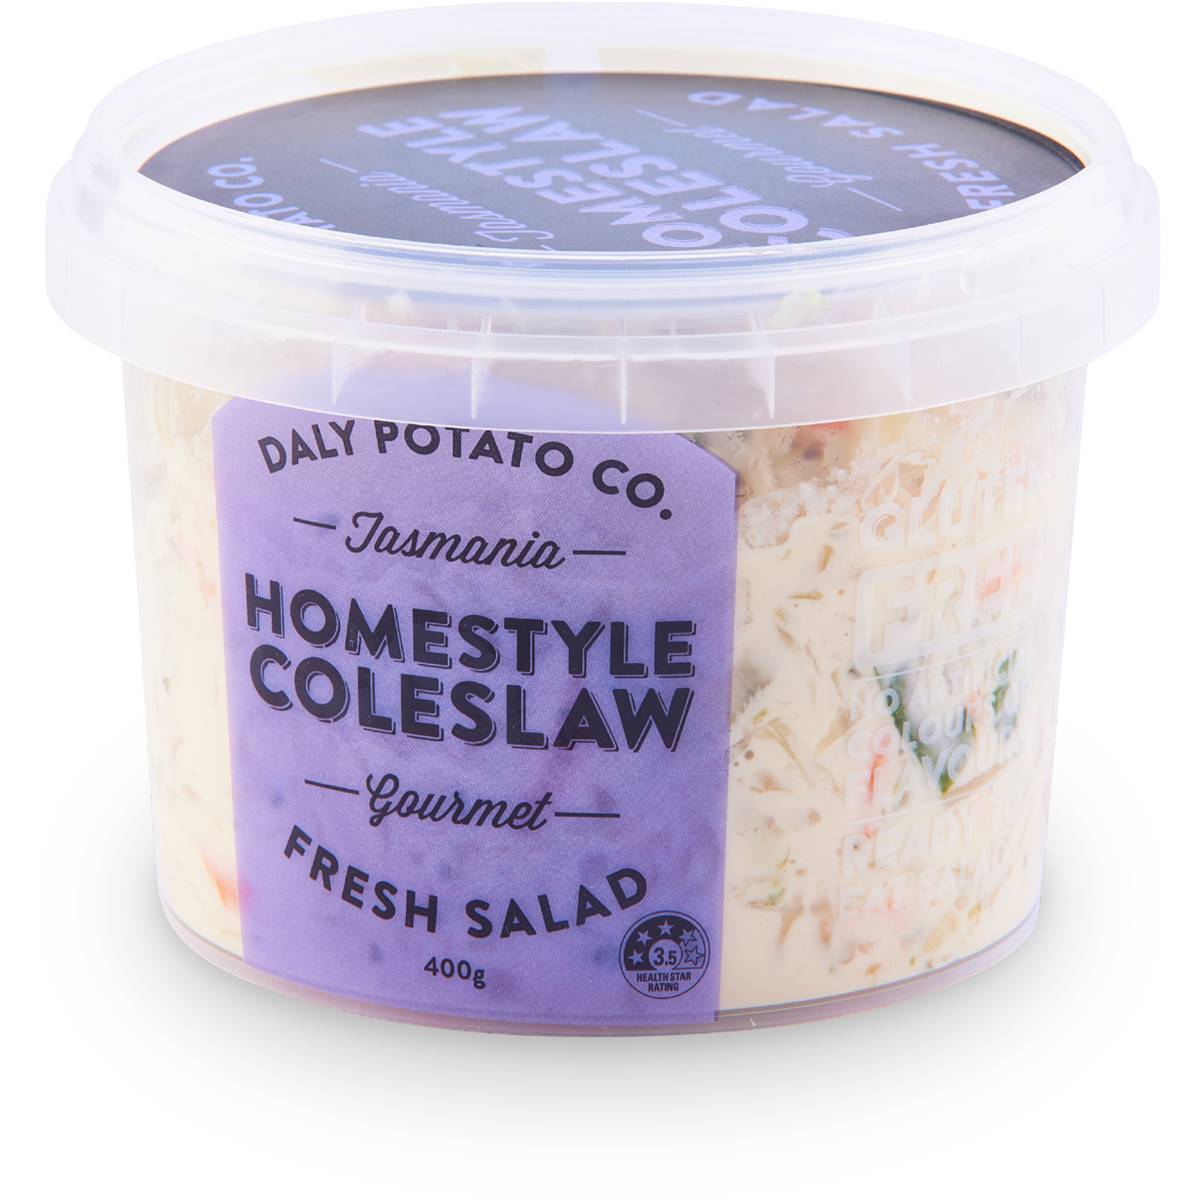 Calories in Daly Potato Co. Homestyle Coleslaw Salad Coleslaw